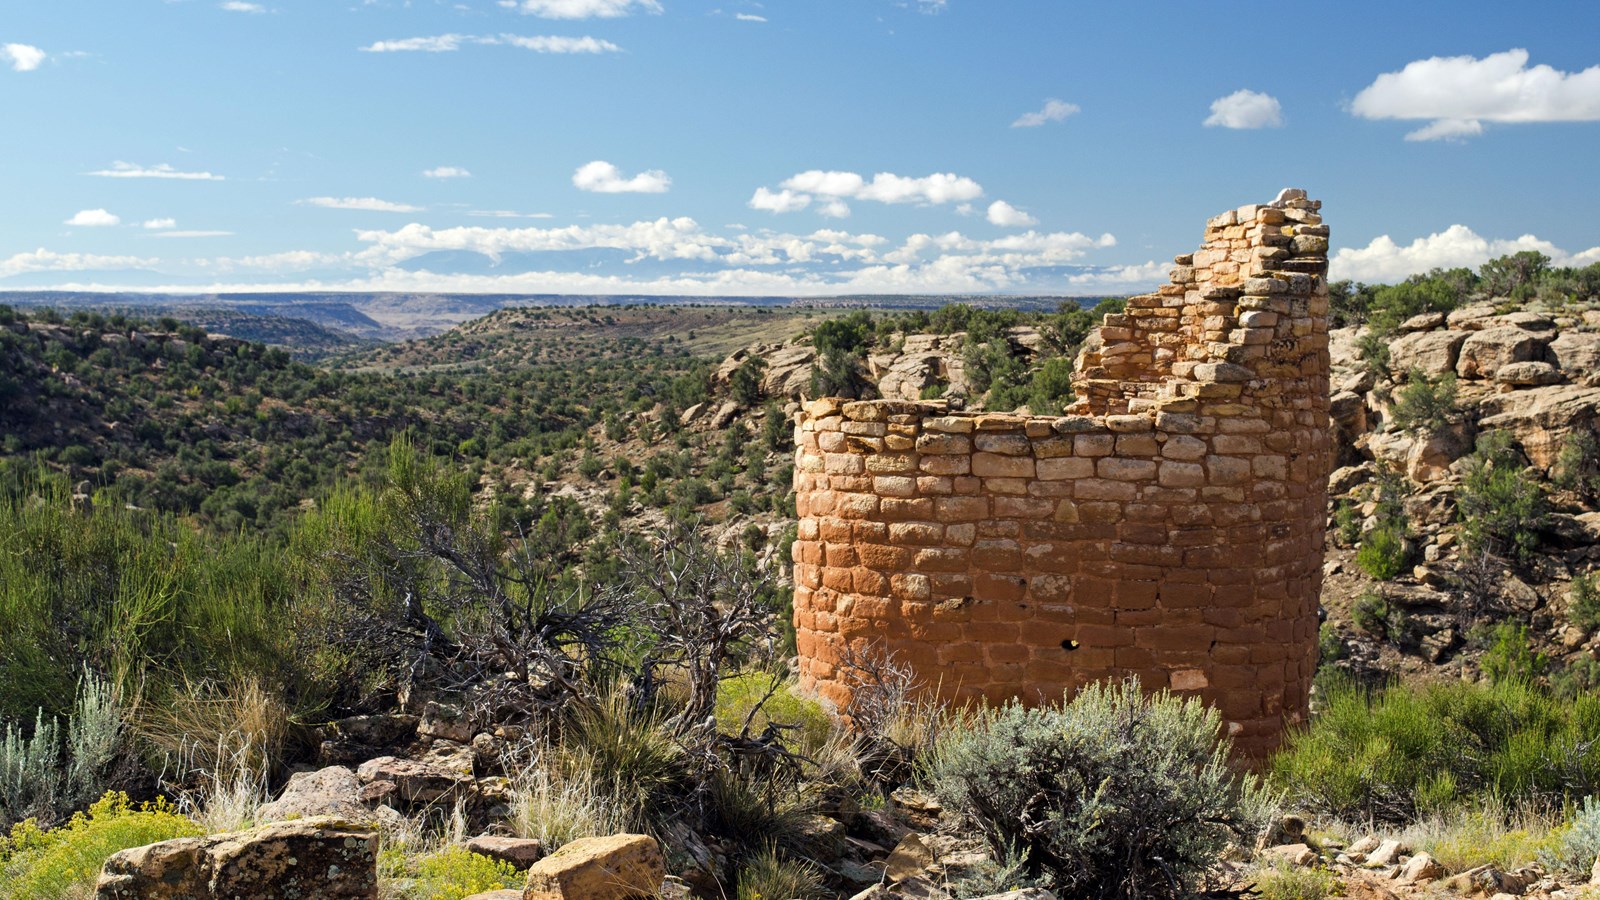 remains of a circular stone tower perched on the canyon rim, canyon country behind